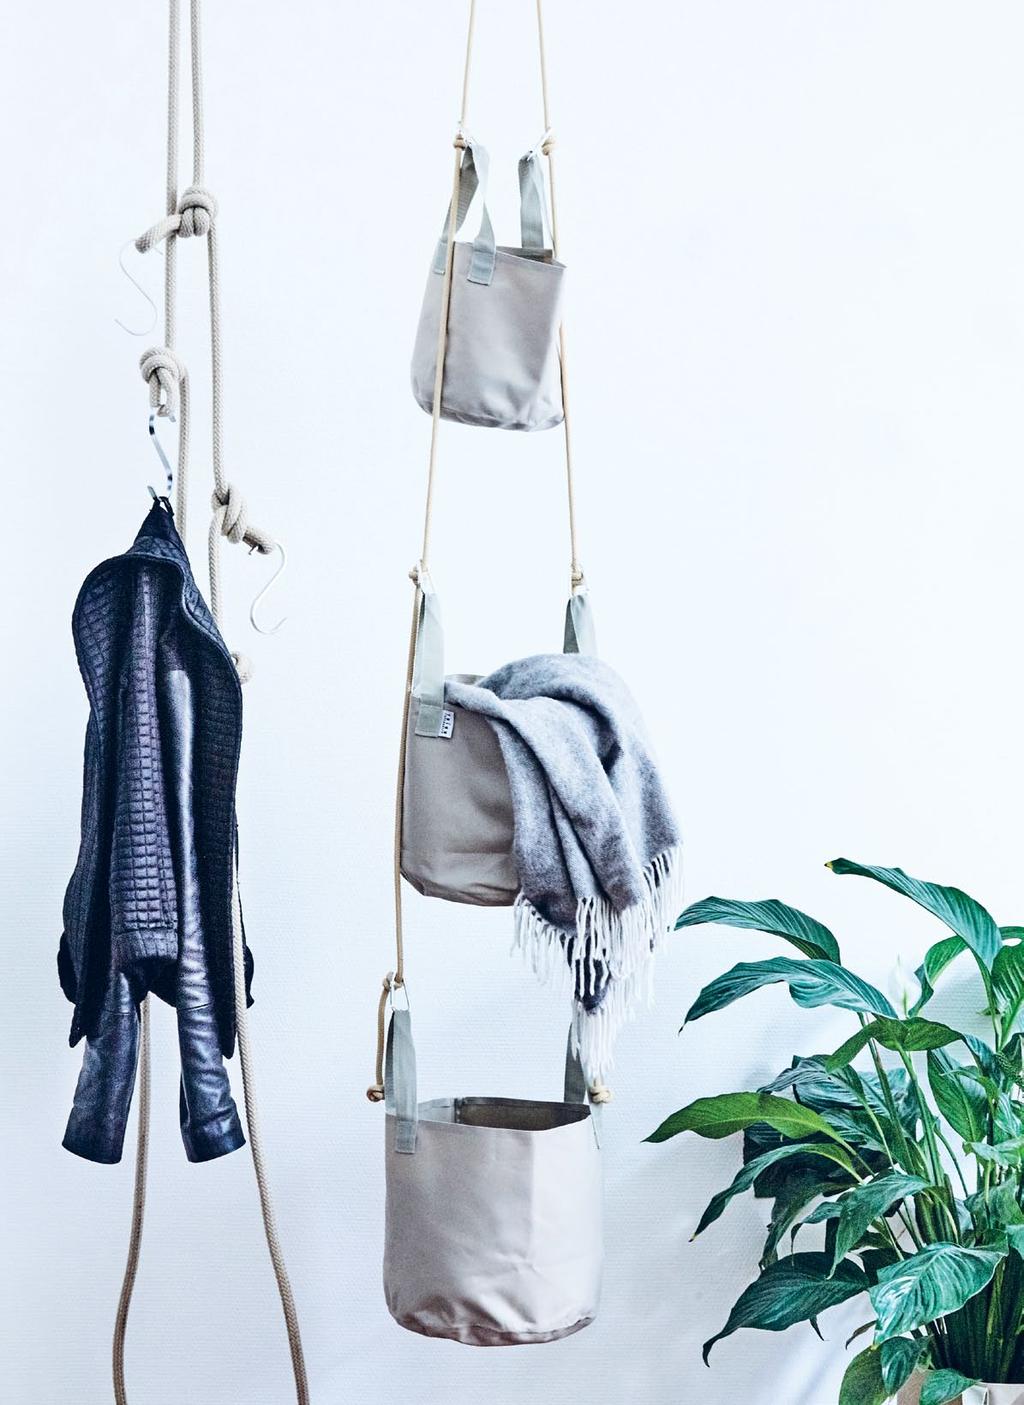 VERTICAL ROPE RACK & SOFT POTS Are both designed for small hallways and wardrobes.